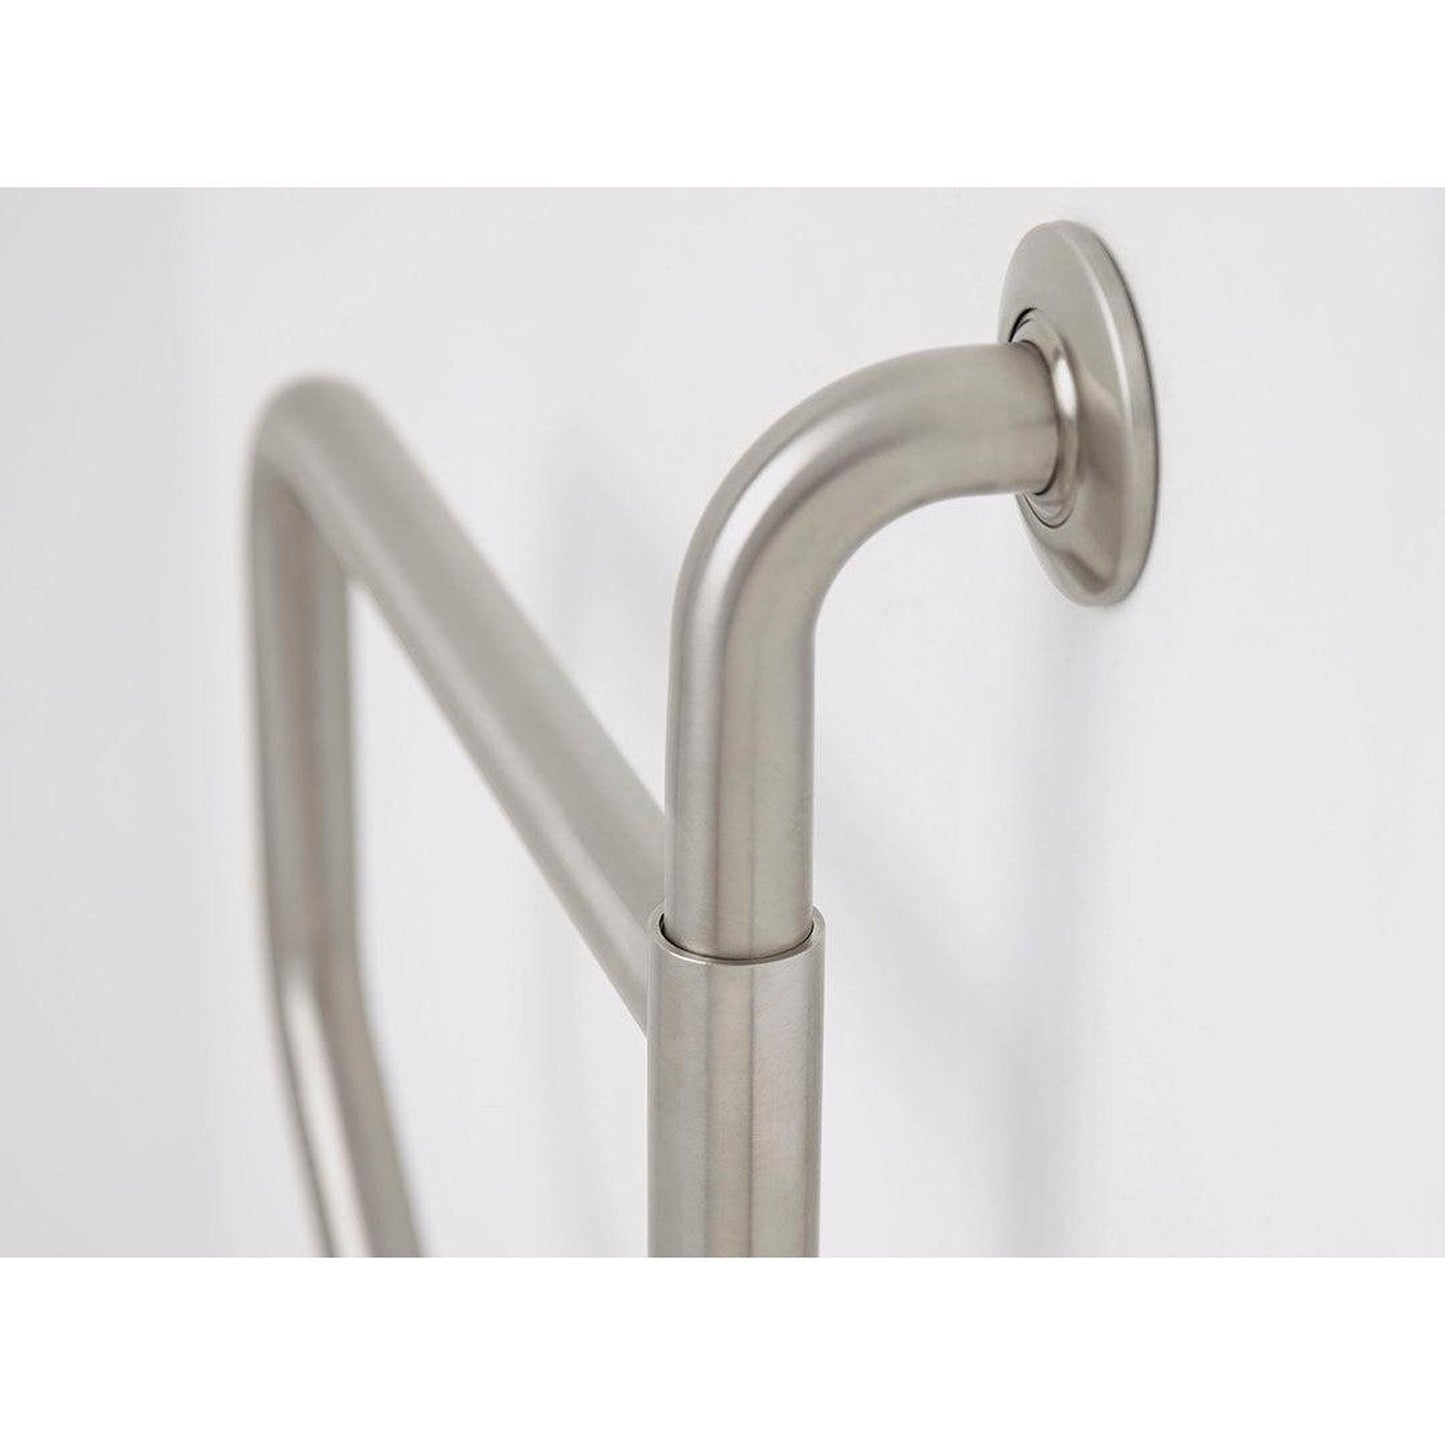 Seachrome Lifestyle & Wellness Series 39" Polished Stainless Steel Wall-To-Floor Swing Away Grab Bar